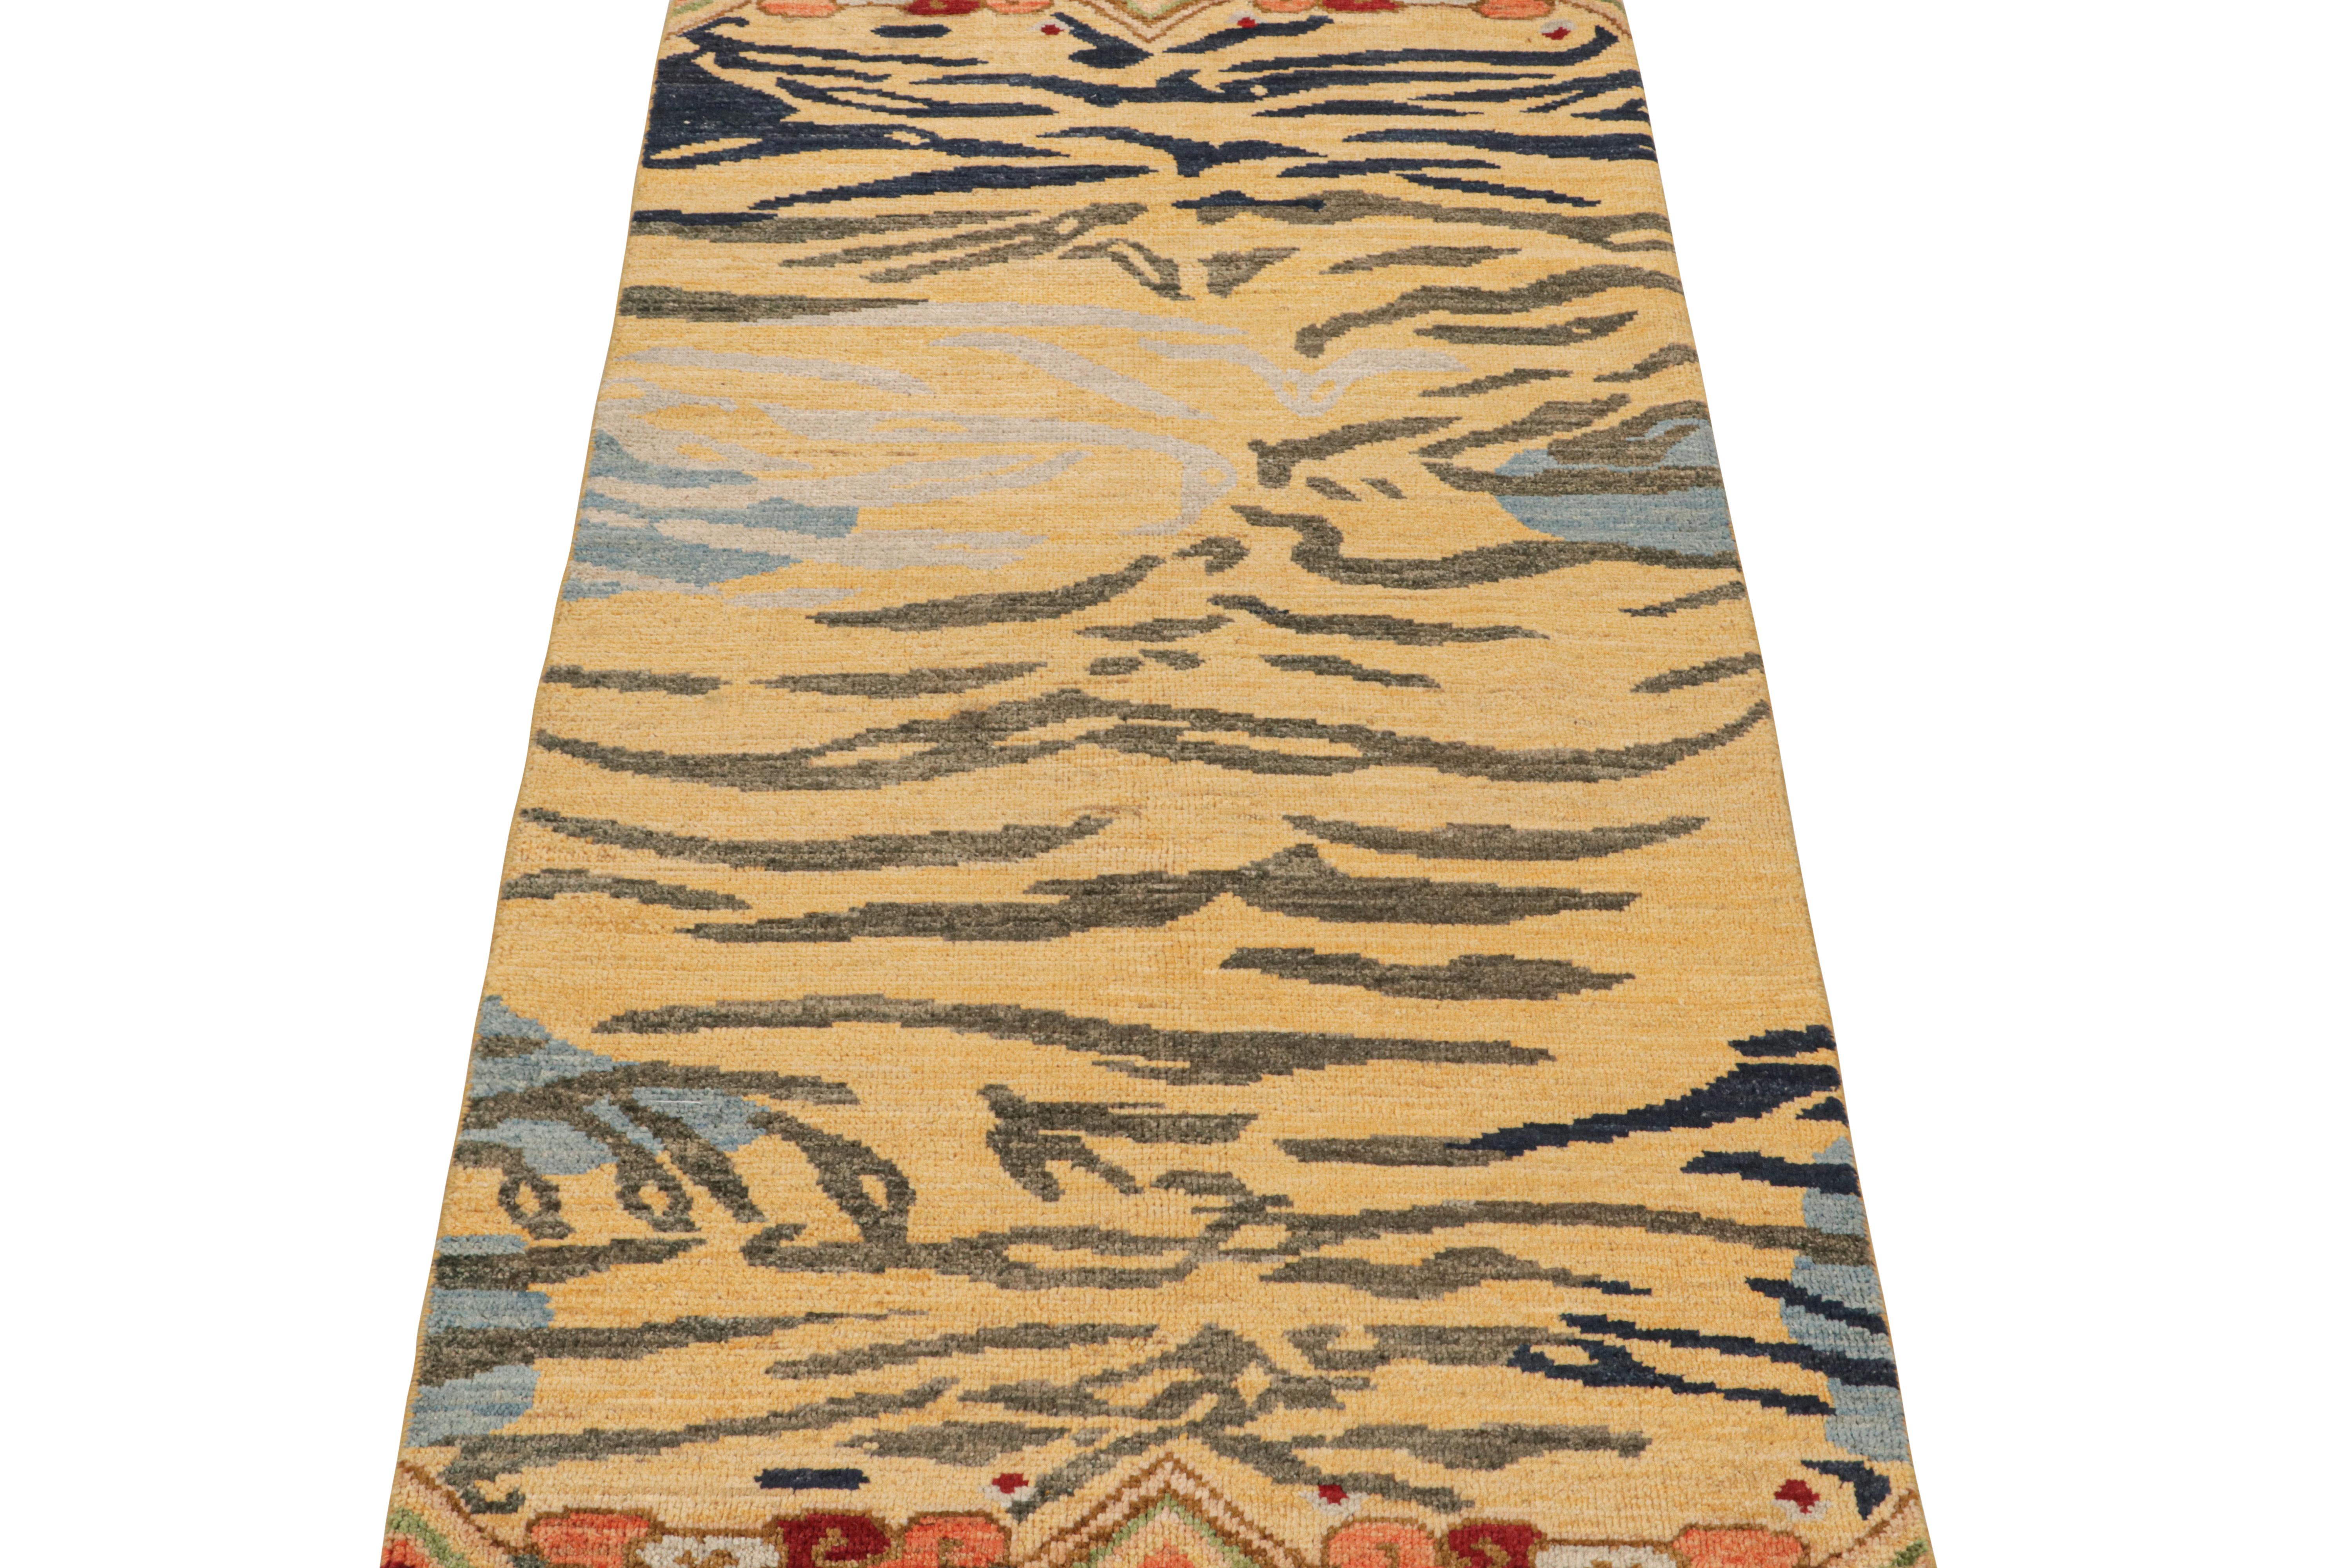 This contemporary 3x6 runner is a bold new addition to Rug & Kilim’s Tigers Collection. Our collection spans several cultures and recaptures iconic pictorial styles in folk art and handmade Oriental rugs alike. 

Further on the Design:

This